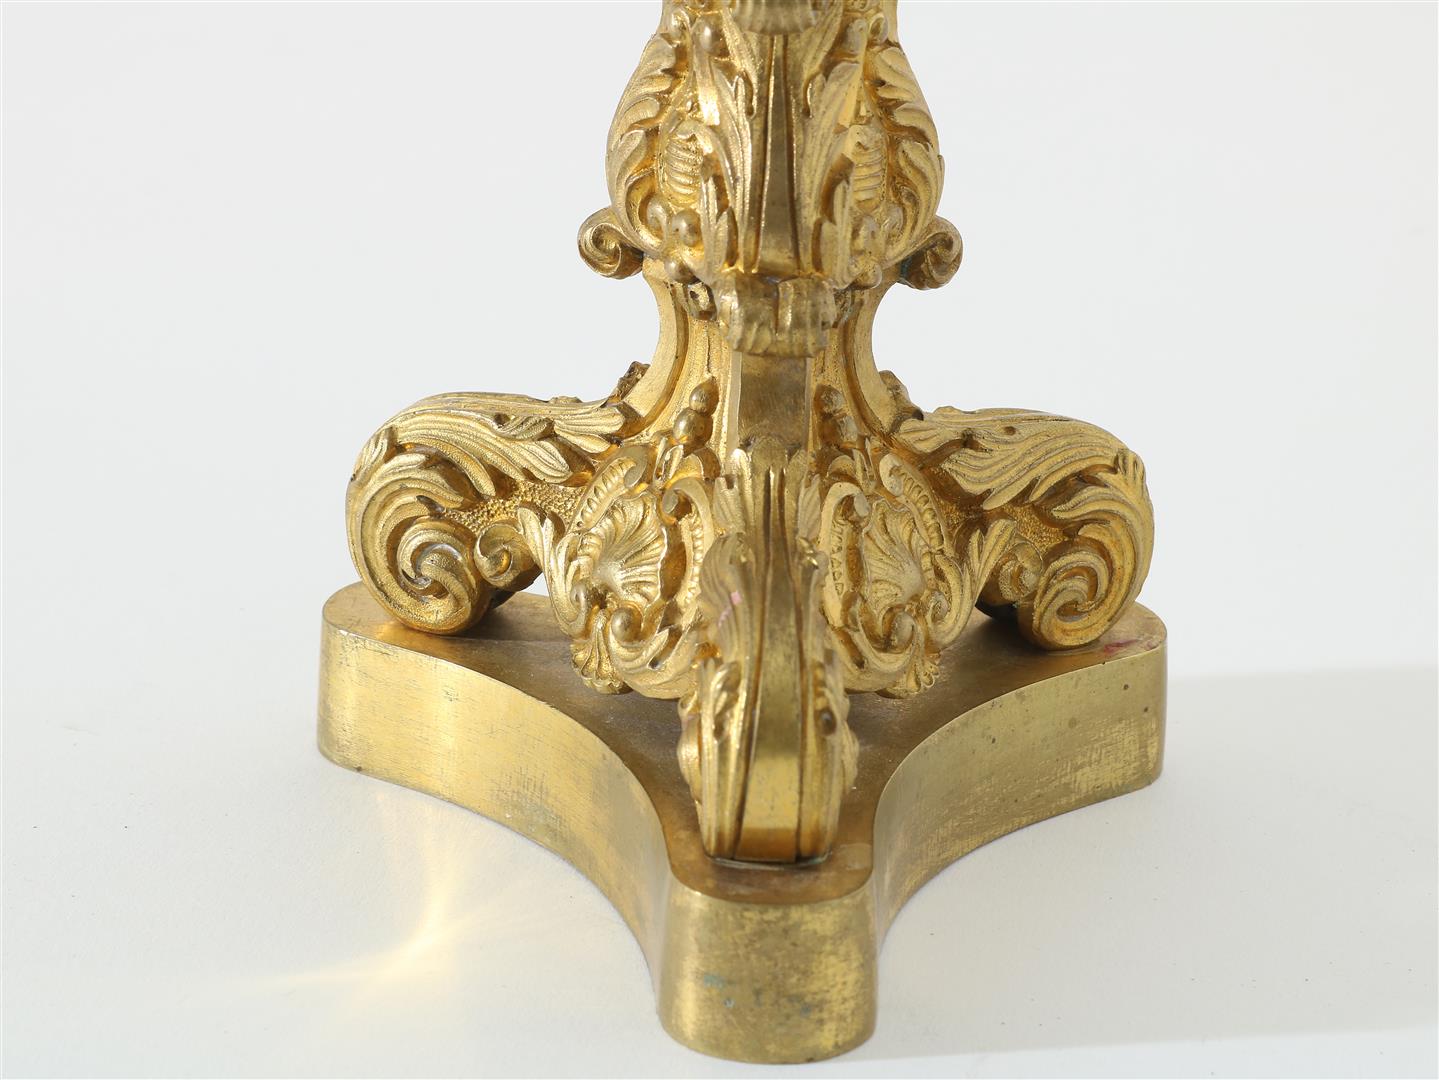 Set ormolu-gilded brass candlesticks, decorated with leaves and scallops, 19th century, height 29 - Image 3 of 4